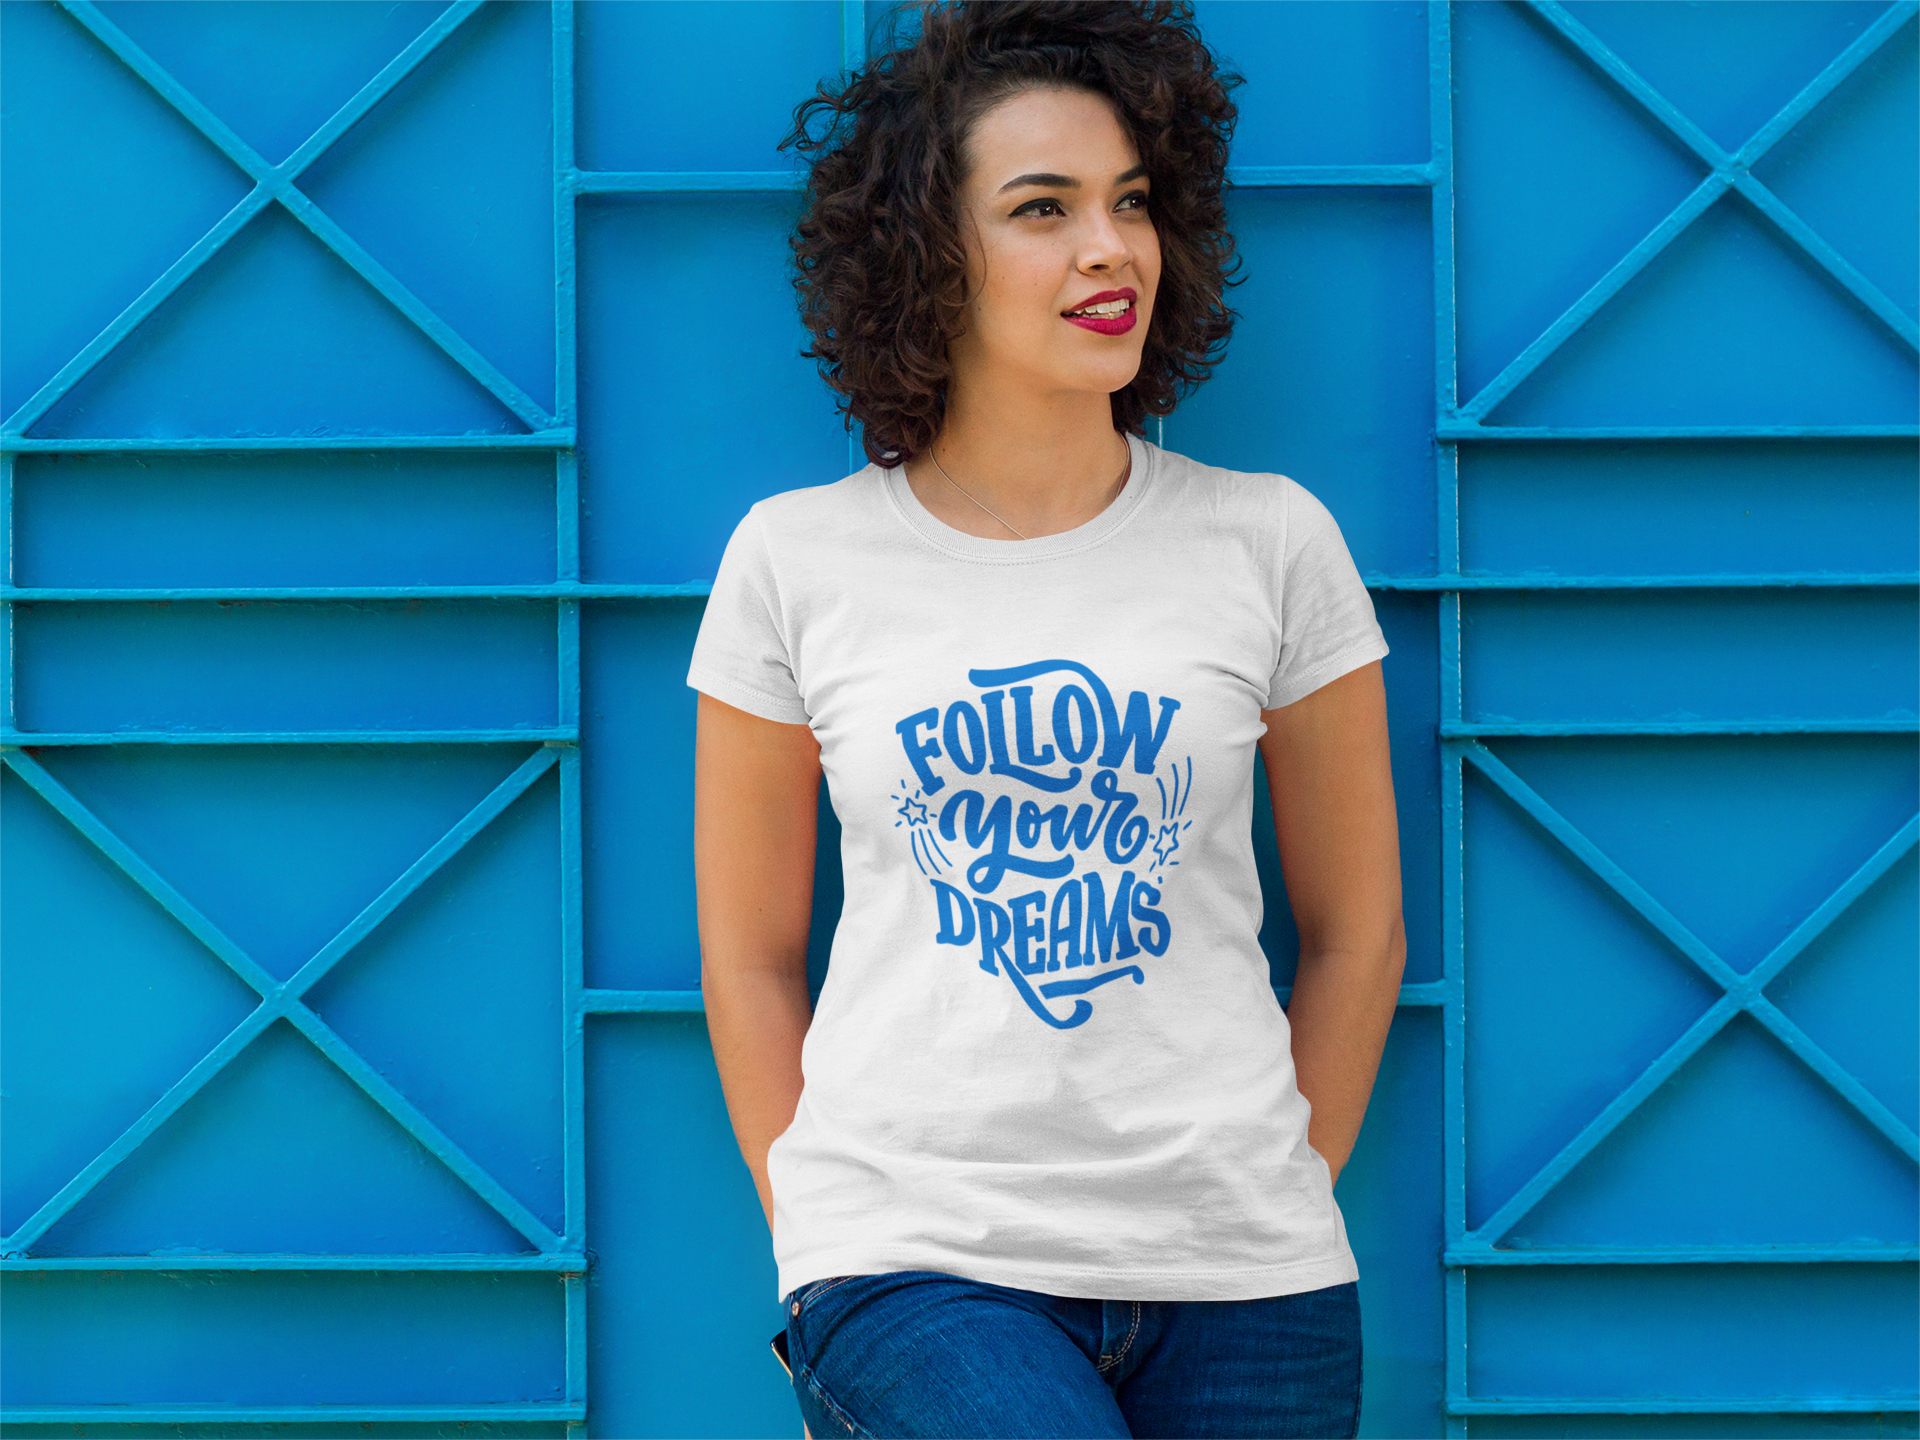 Curly hair woman standing in front of blue wall wearing a follow your dreams t-shirt.